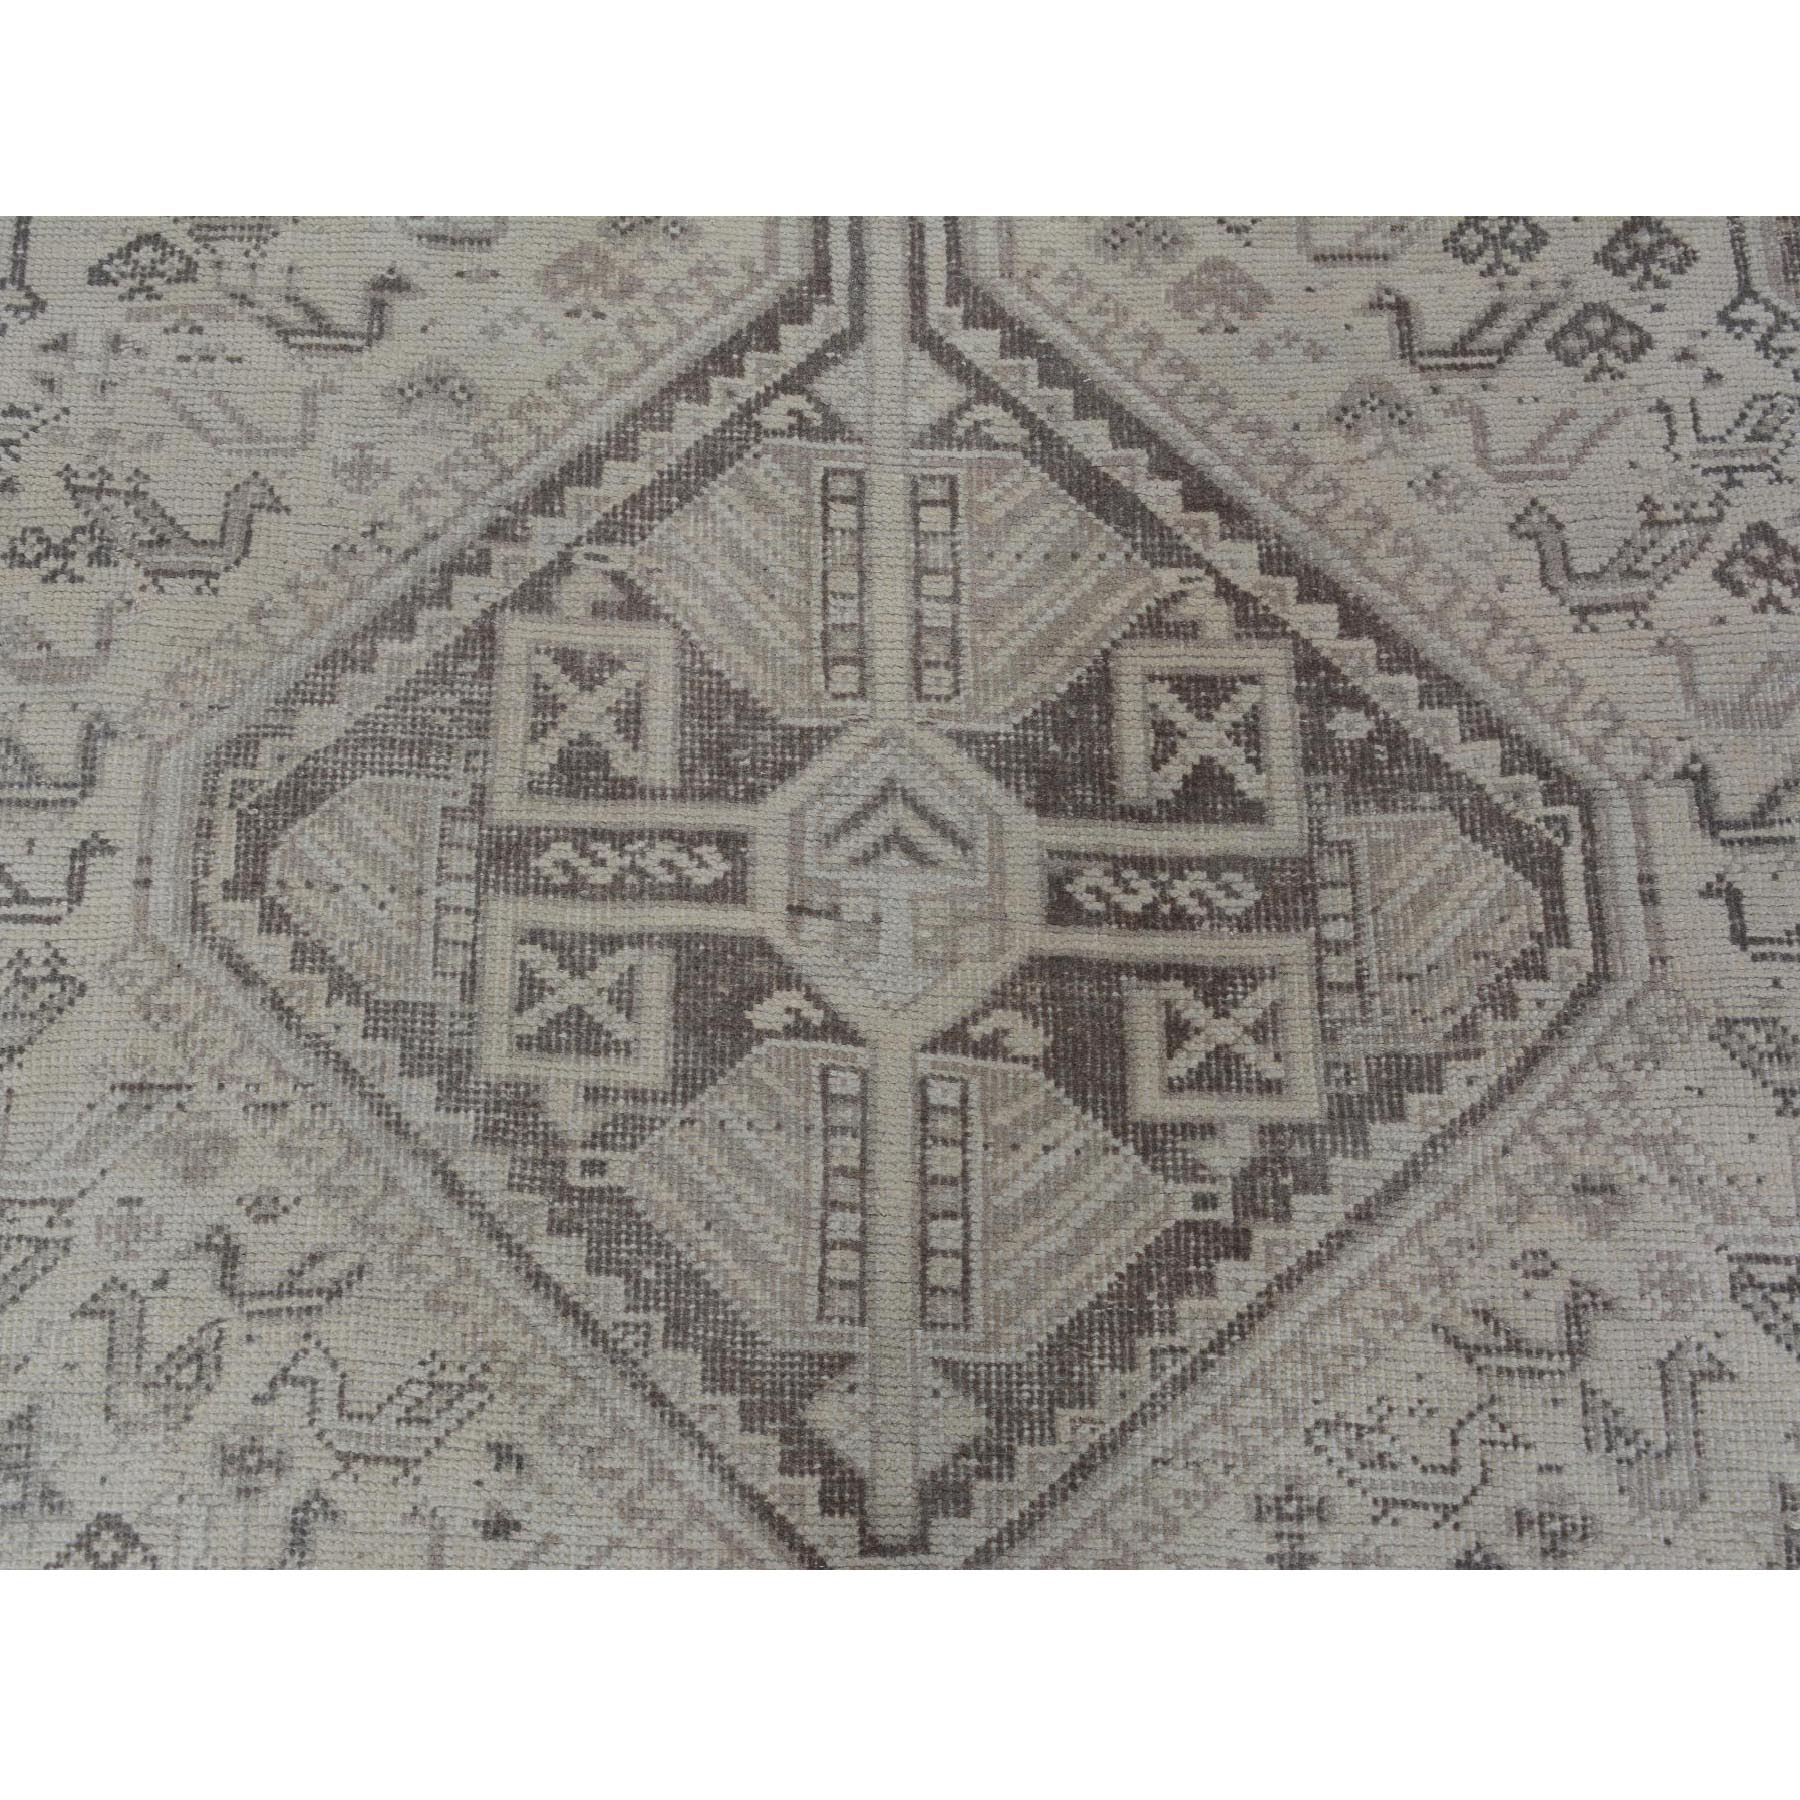 6-10 x9-6  Ivory Faded Vintage Persian Qashqai Worn Down Hand Knotted Oriental Rug 